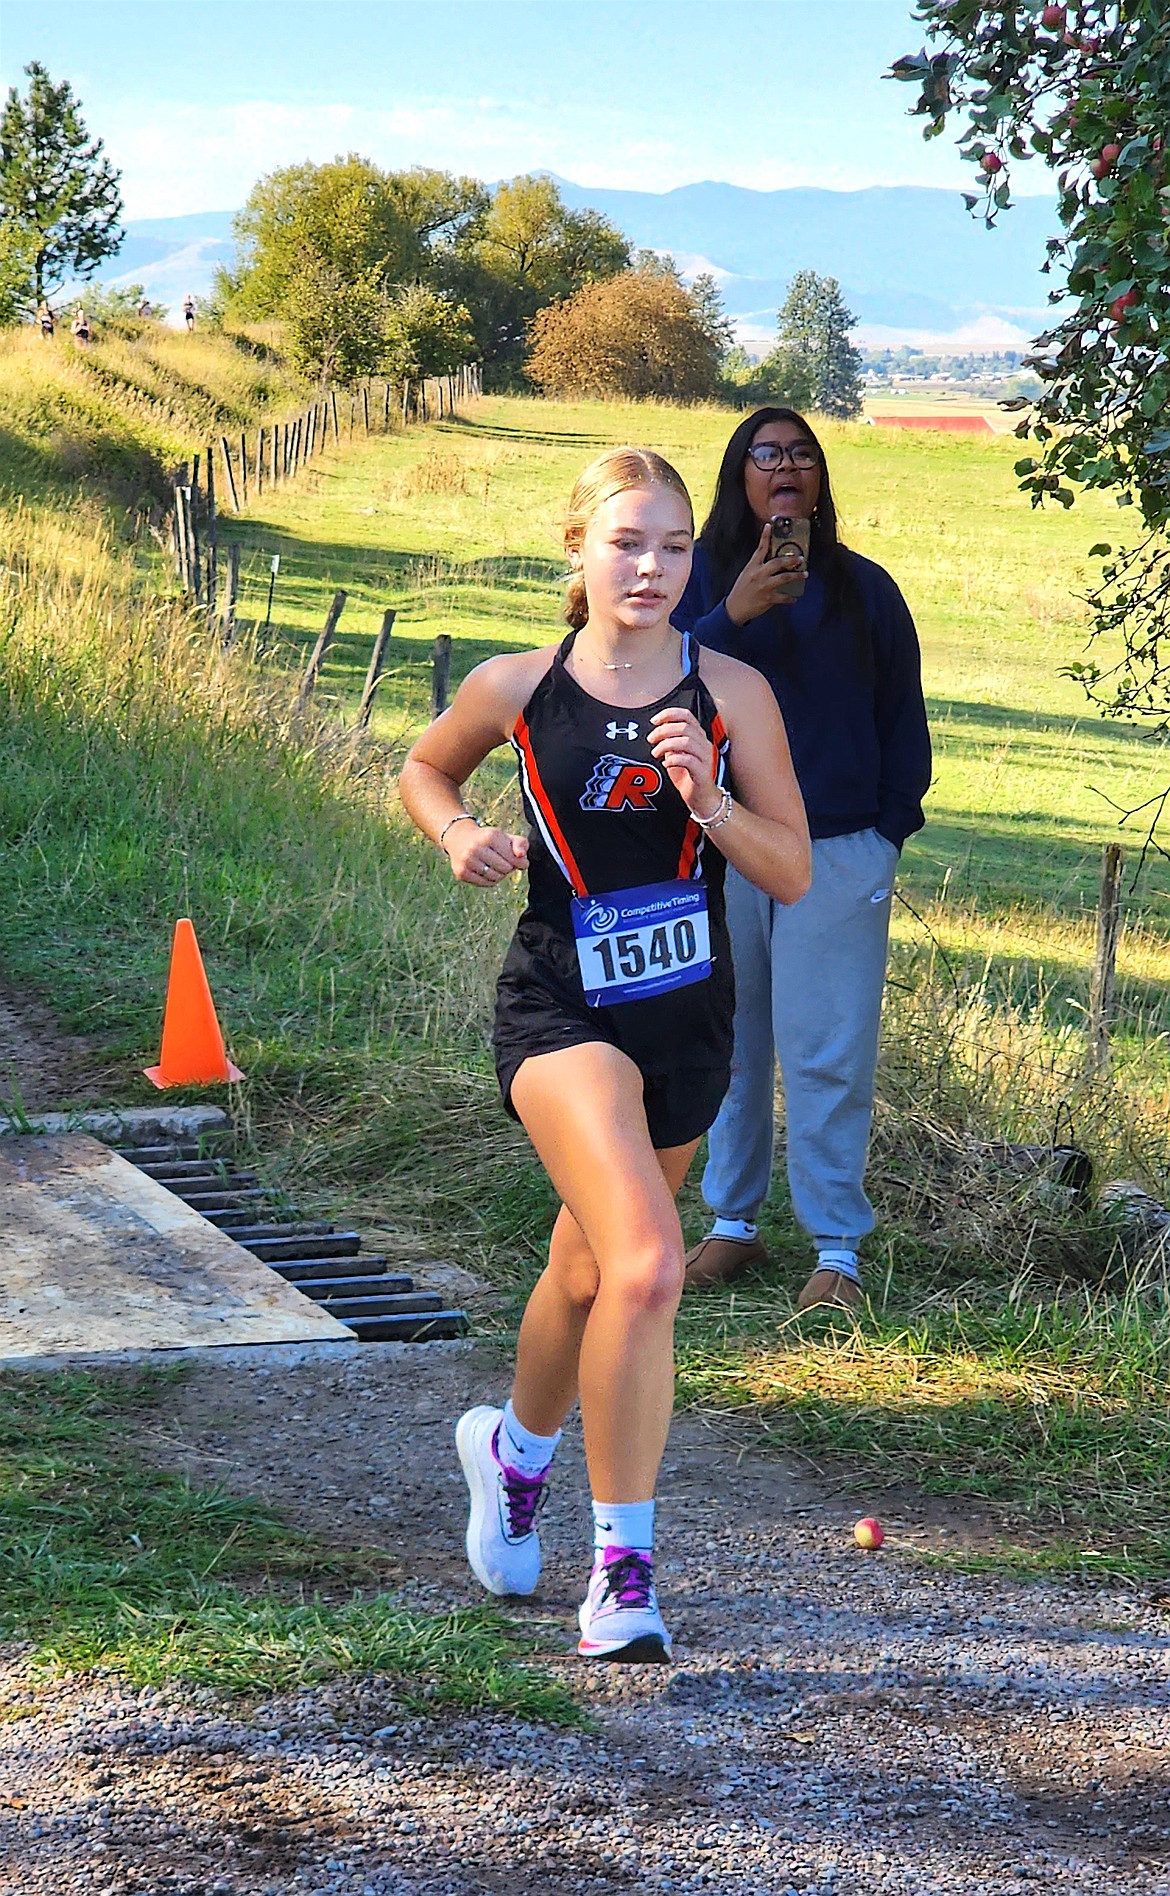 Maddy Duffy was the top finisher for the Ronan Maidens in Saturday's Canal Bank Run. (Photo by Jennifer Rolfsness)